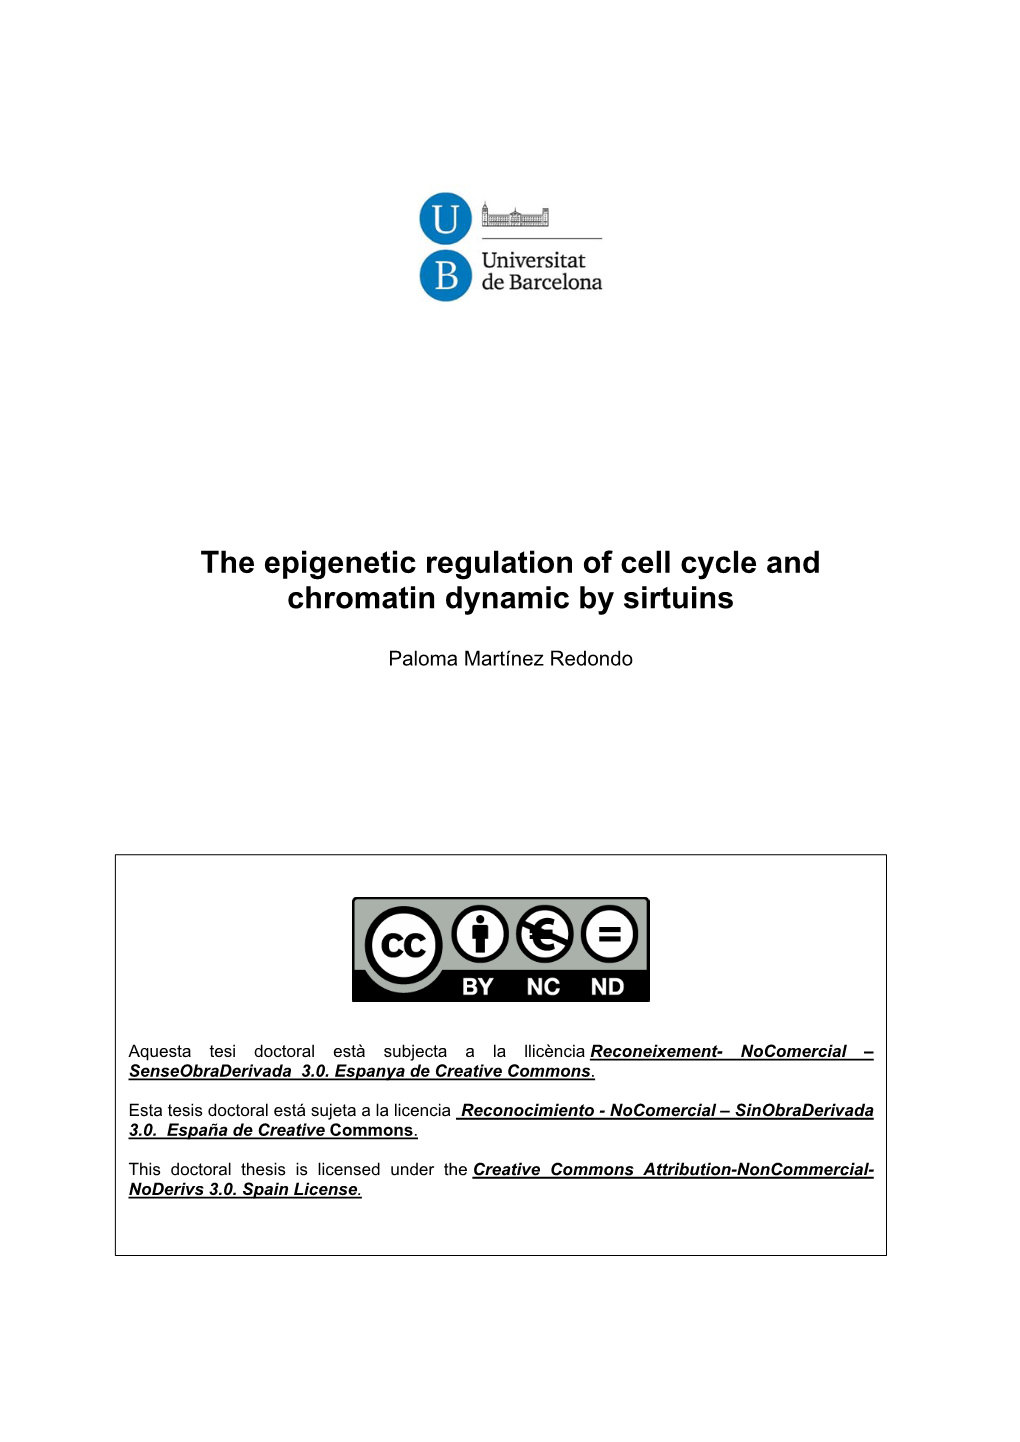 The Epigenetic Regulation of Cell Cycle and Chromatin Dynamic by Sirtuins